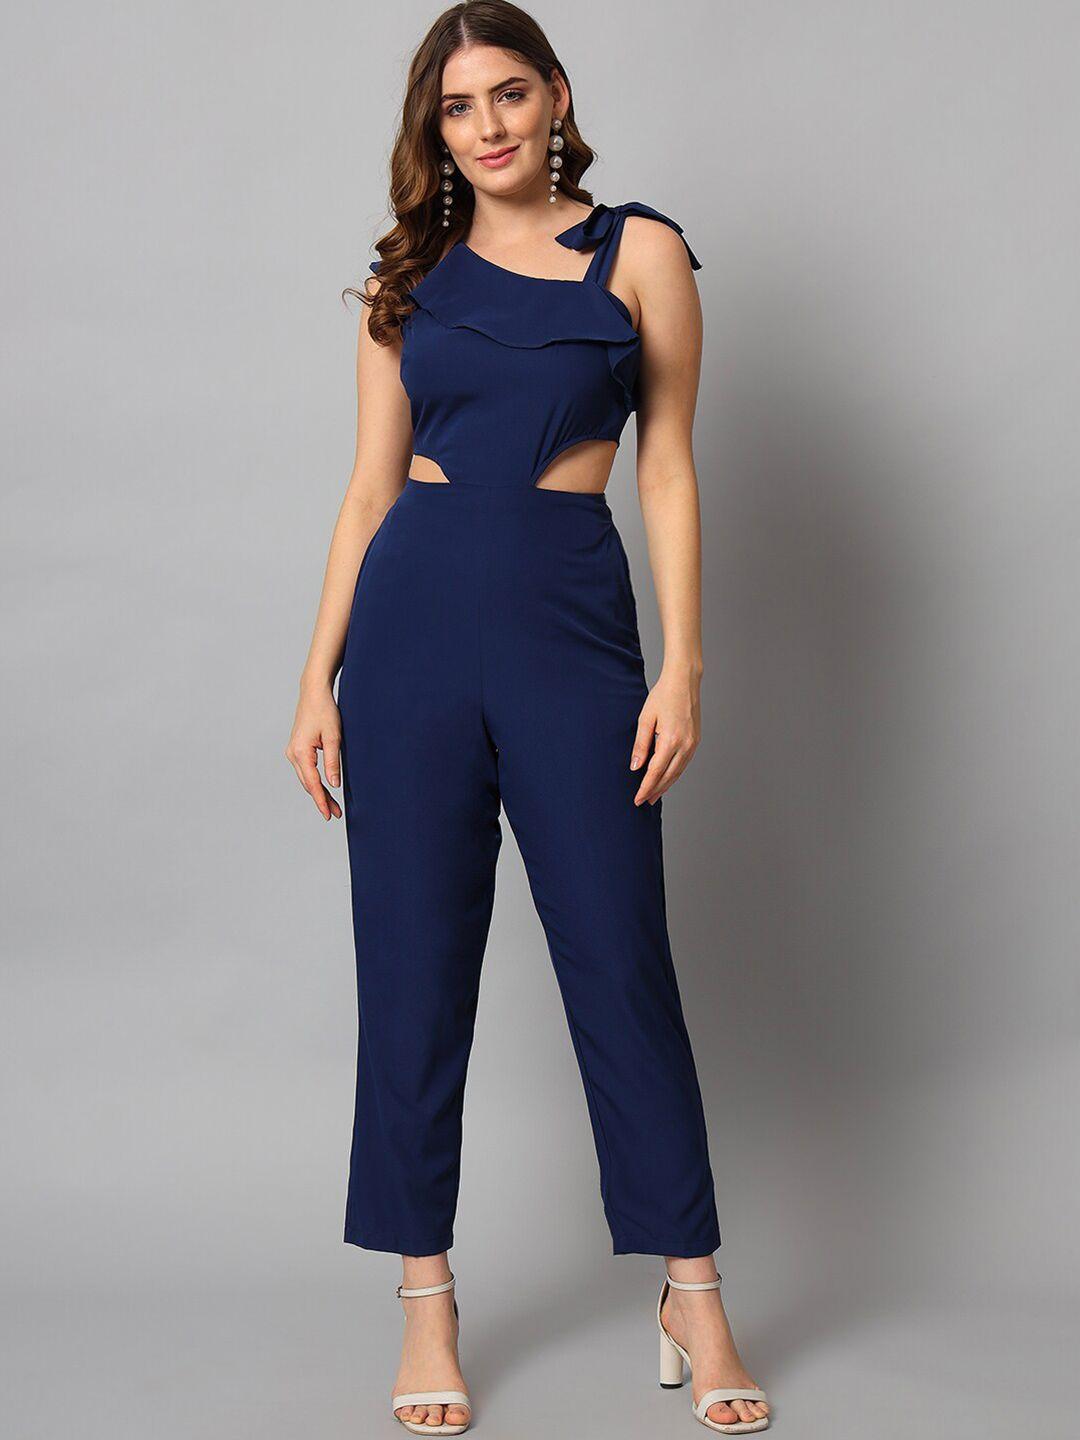 emeros tie-up one shoulder waist cut-out detail basic jumpsuit with ruffles